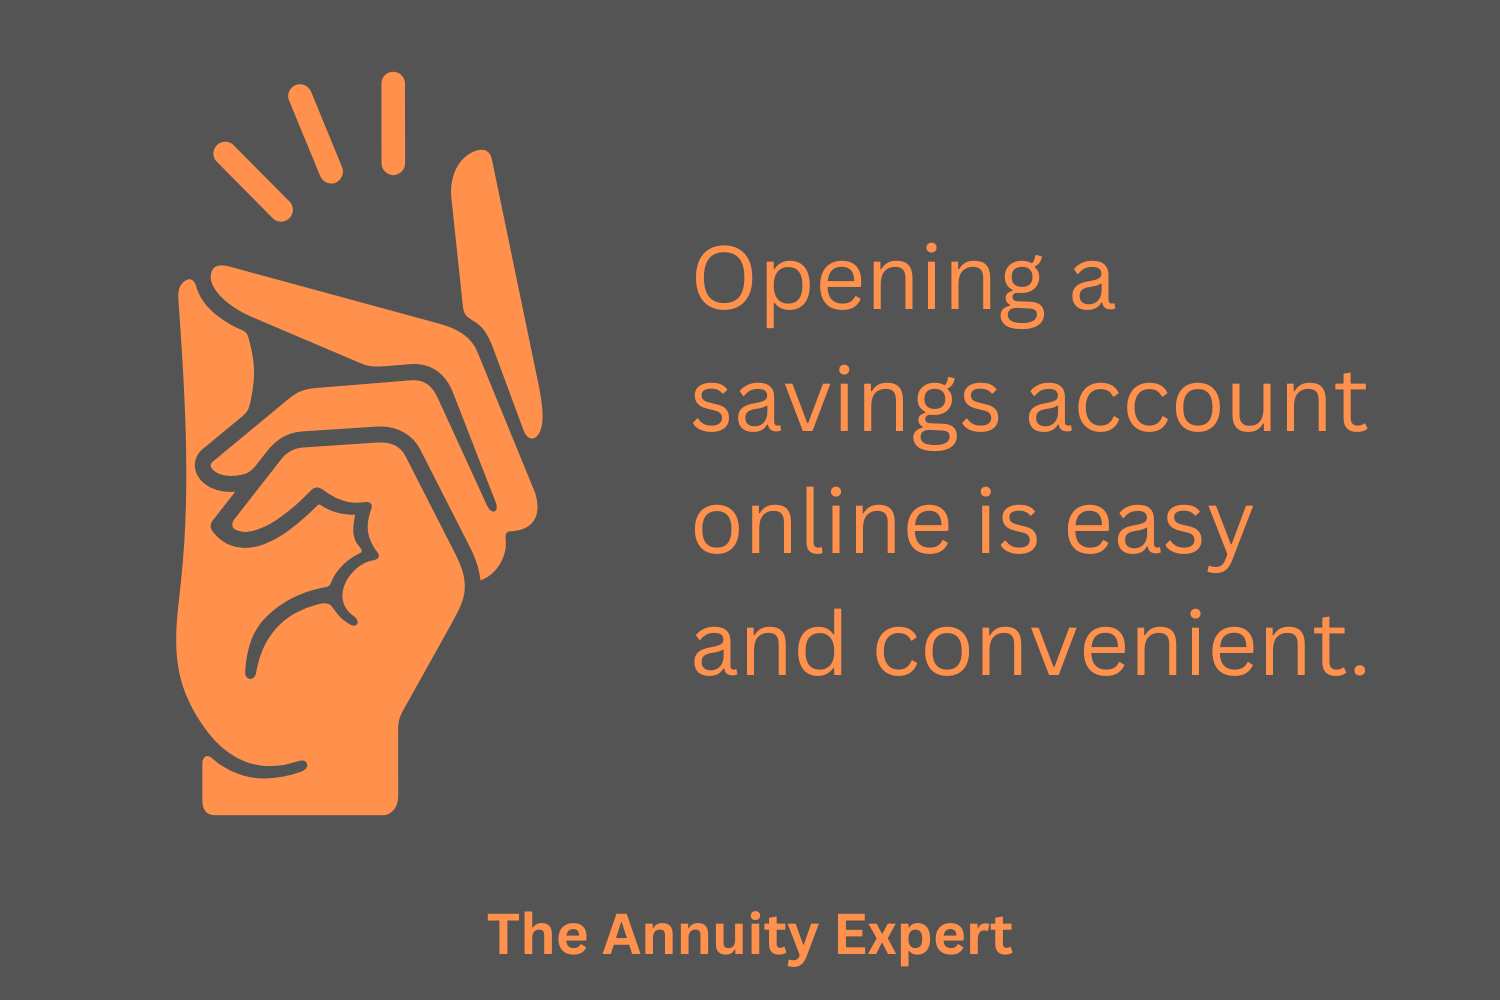 Can I Open A Savings Account Online?